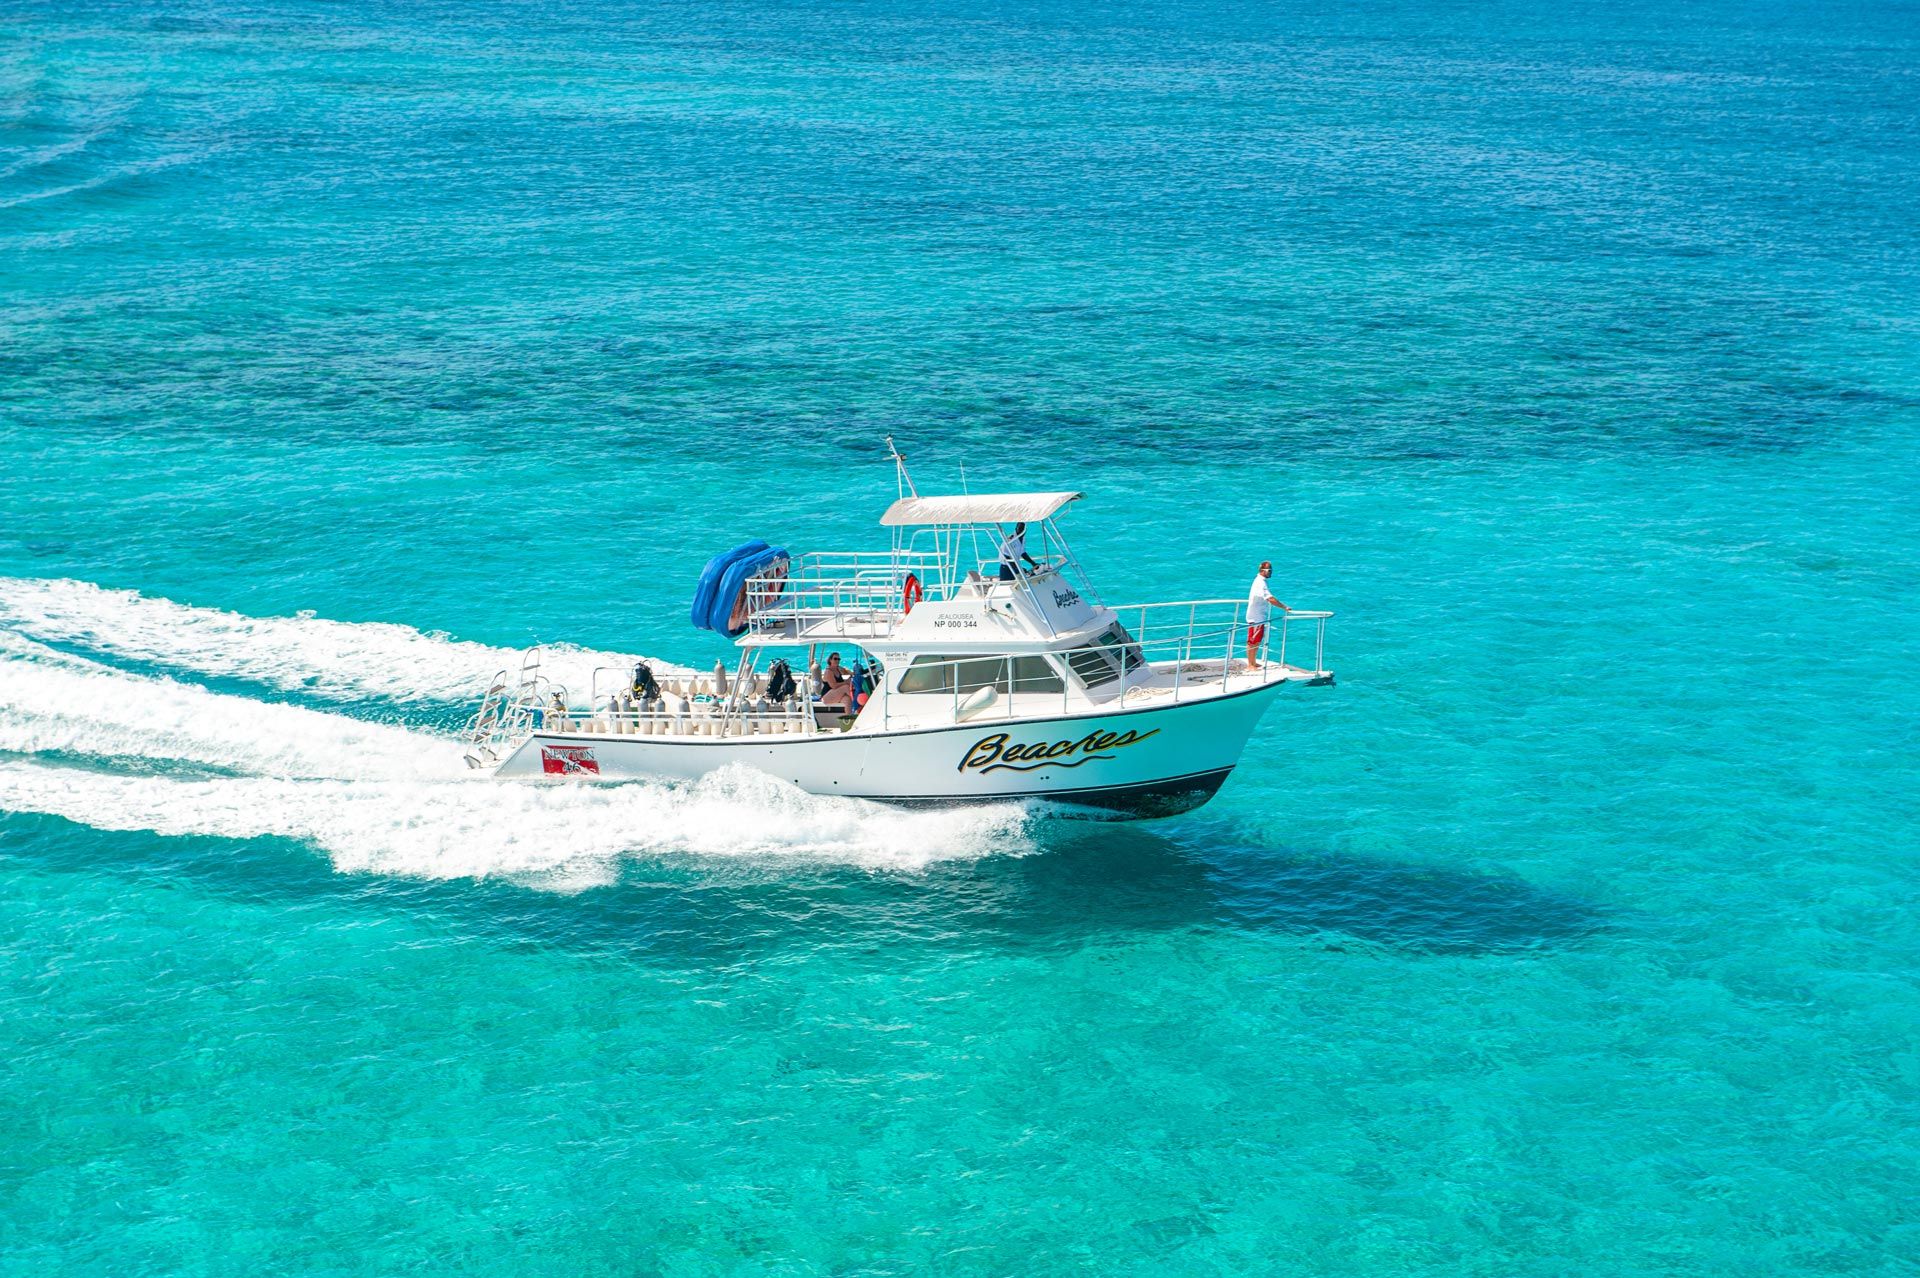 Beaches Turks and Caicos Diving Boat